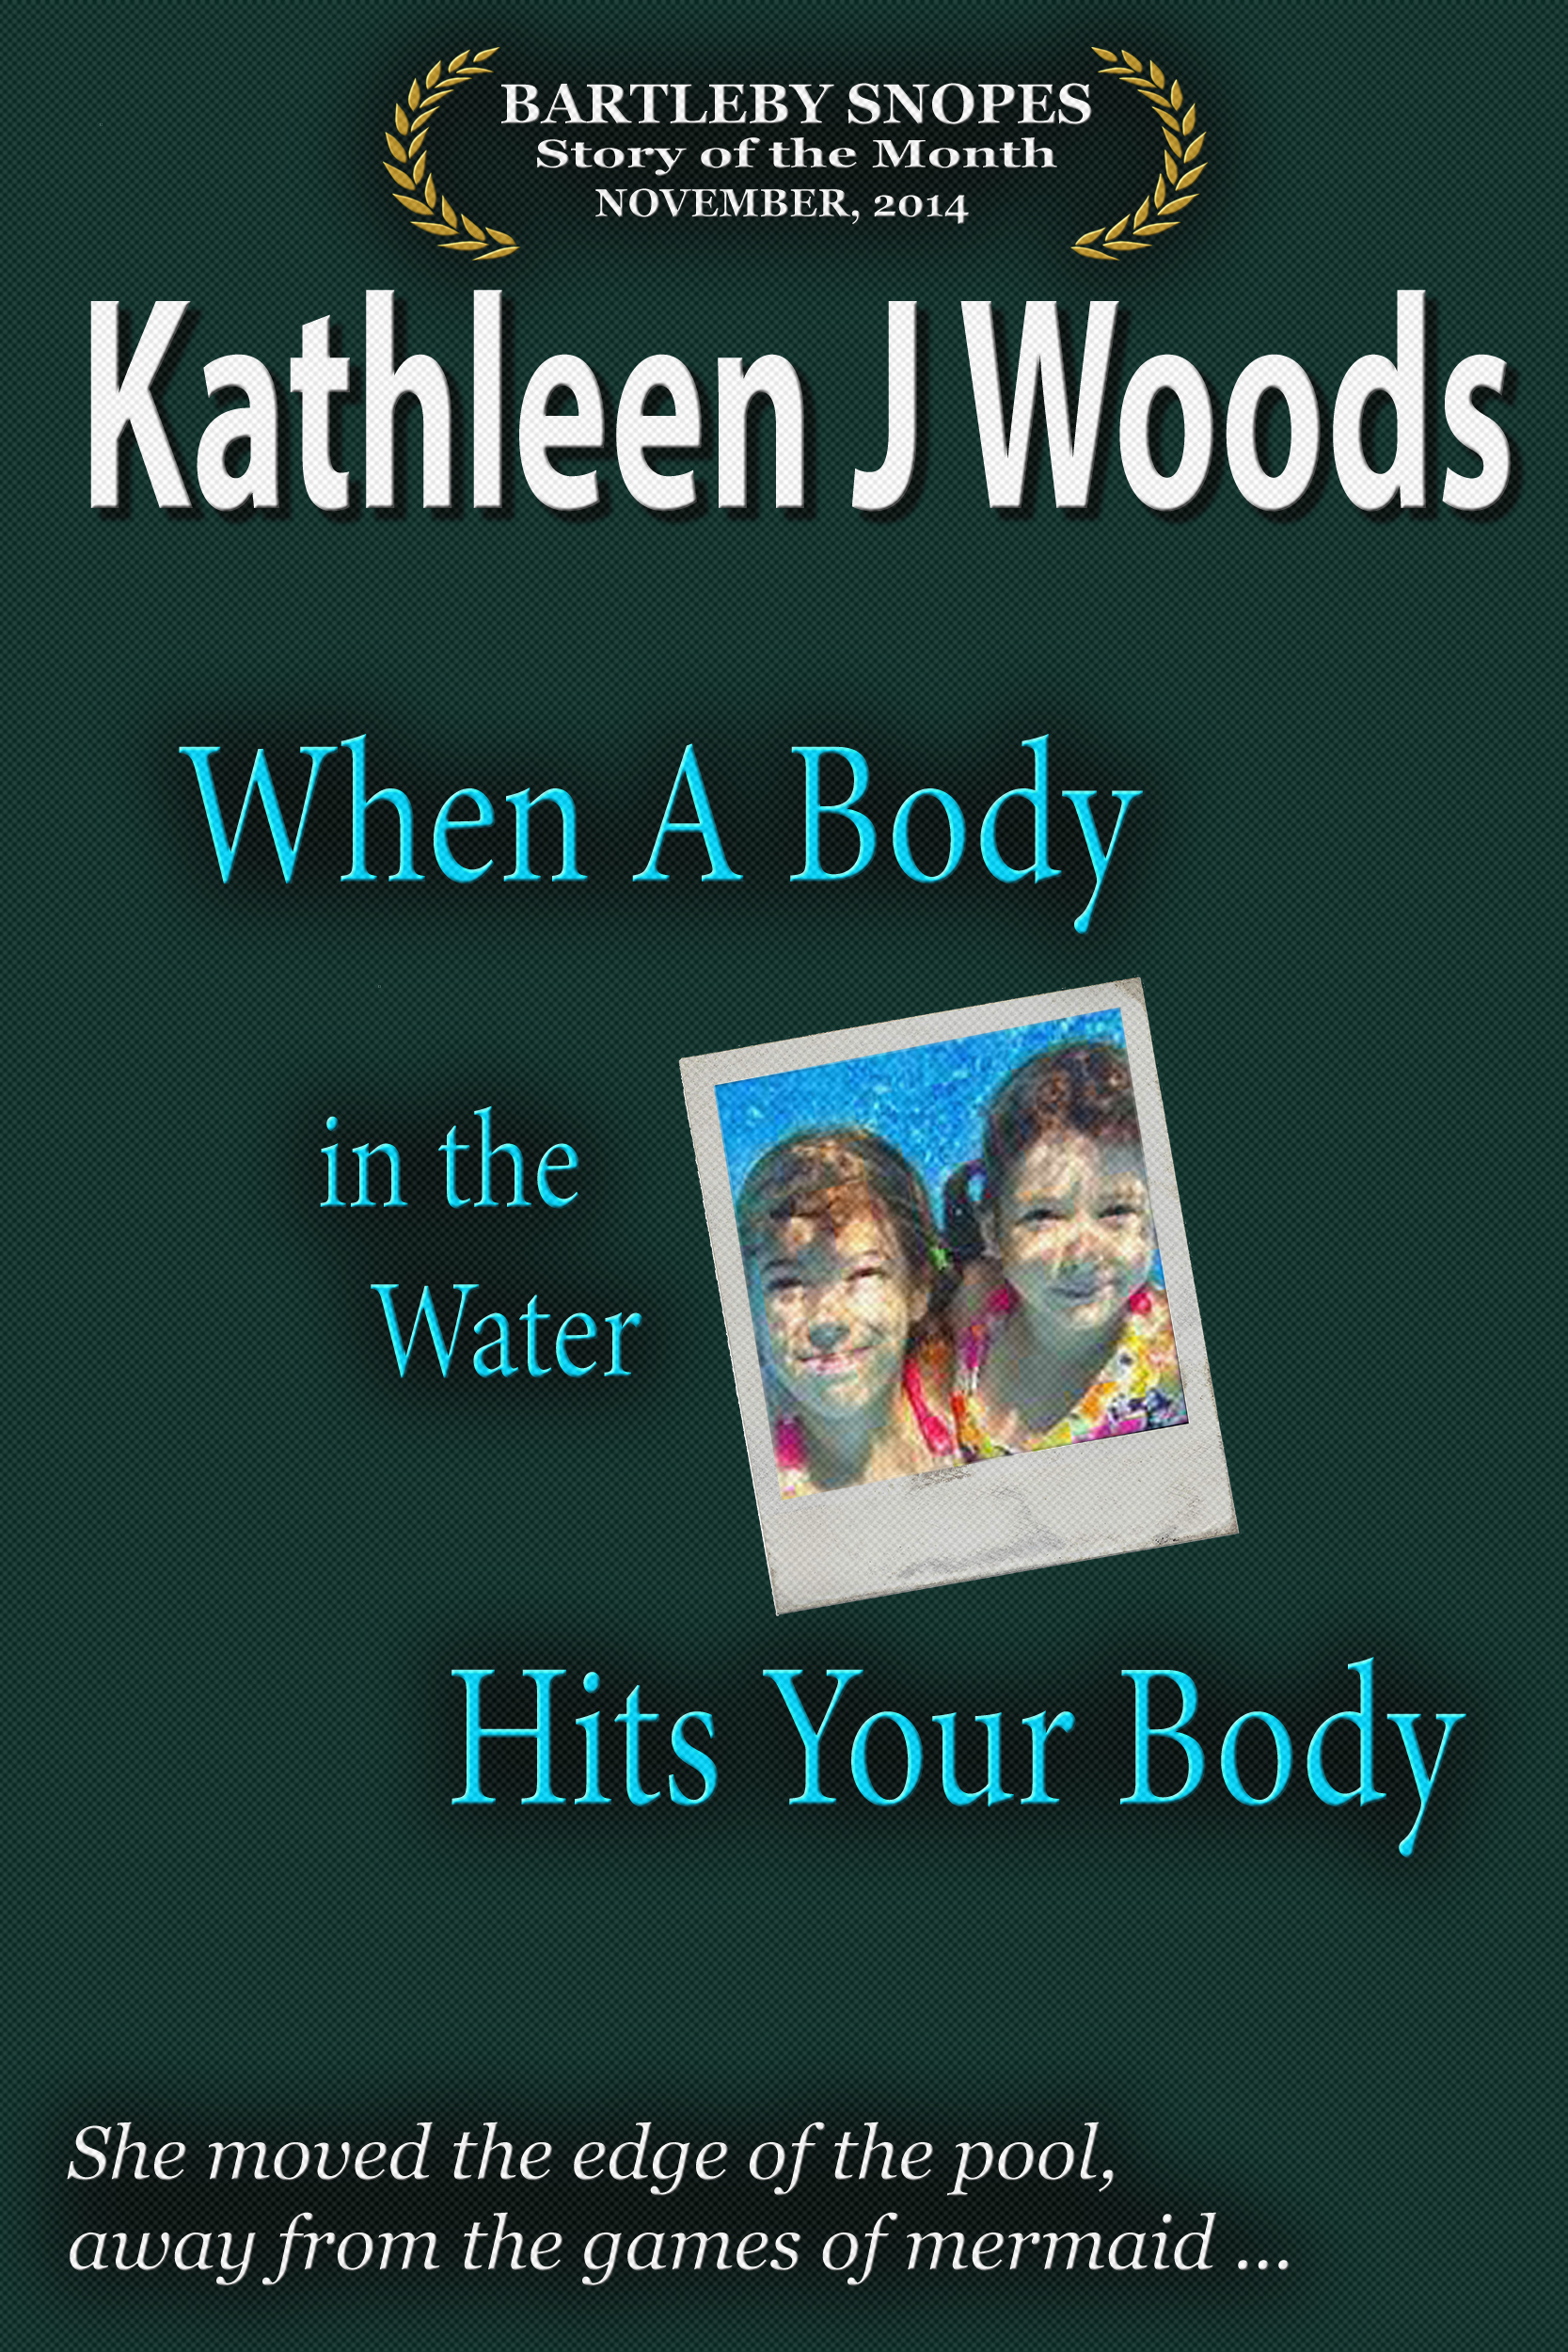 Kathleen J Woods Story of Month